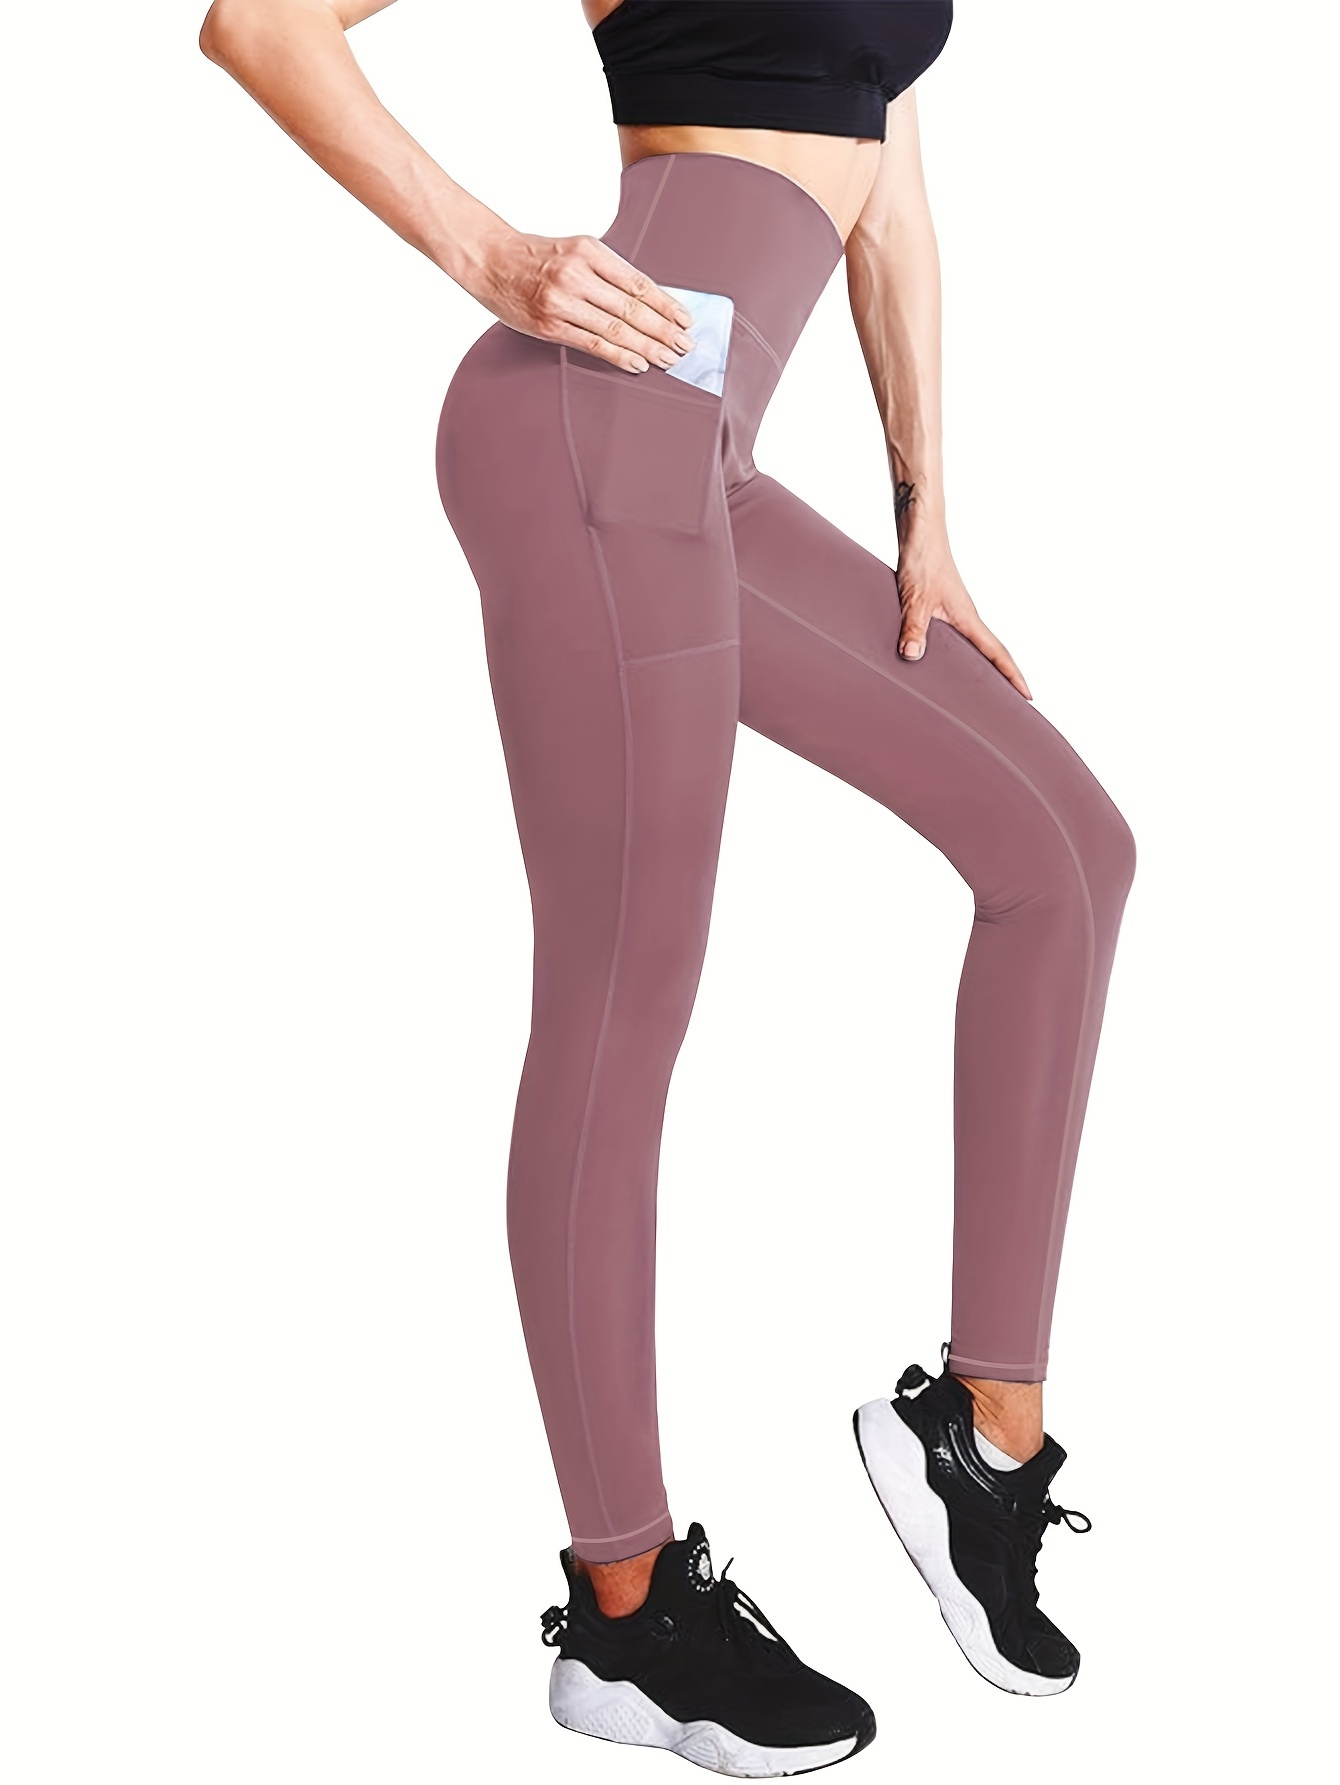 Being Runner Combo of 3 Yoga & Gym Wear Legging Tights Set